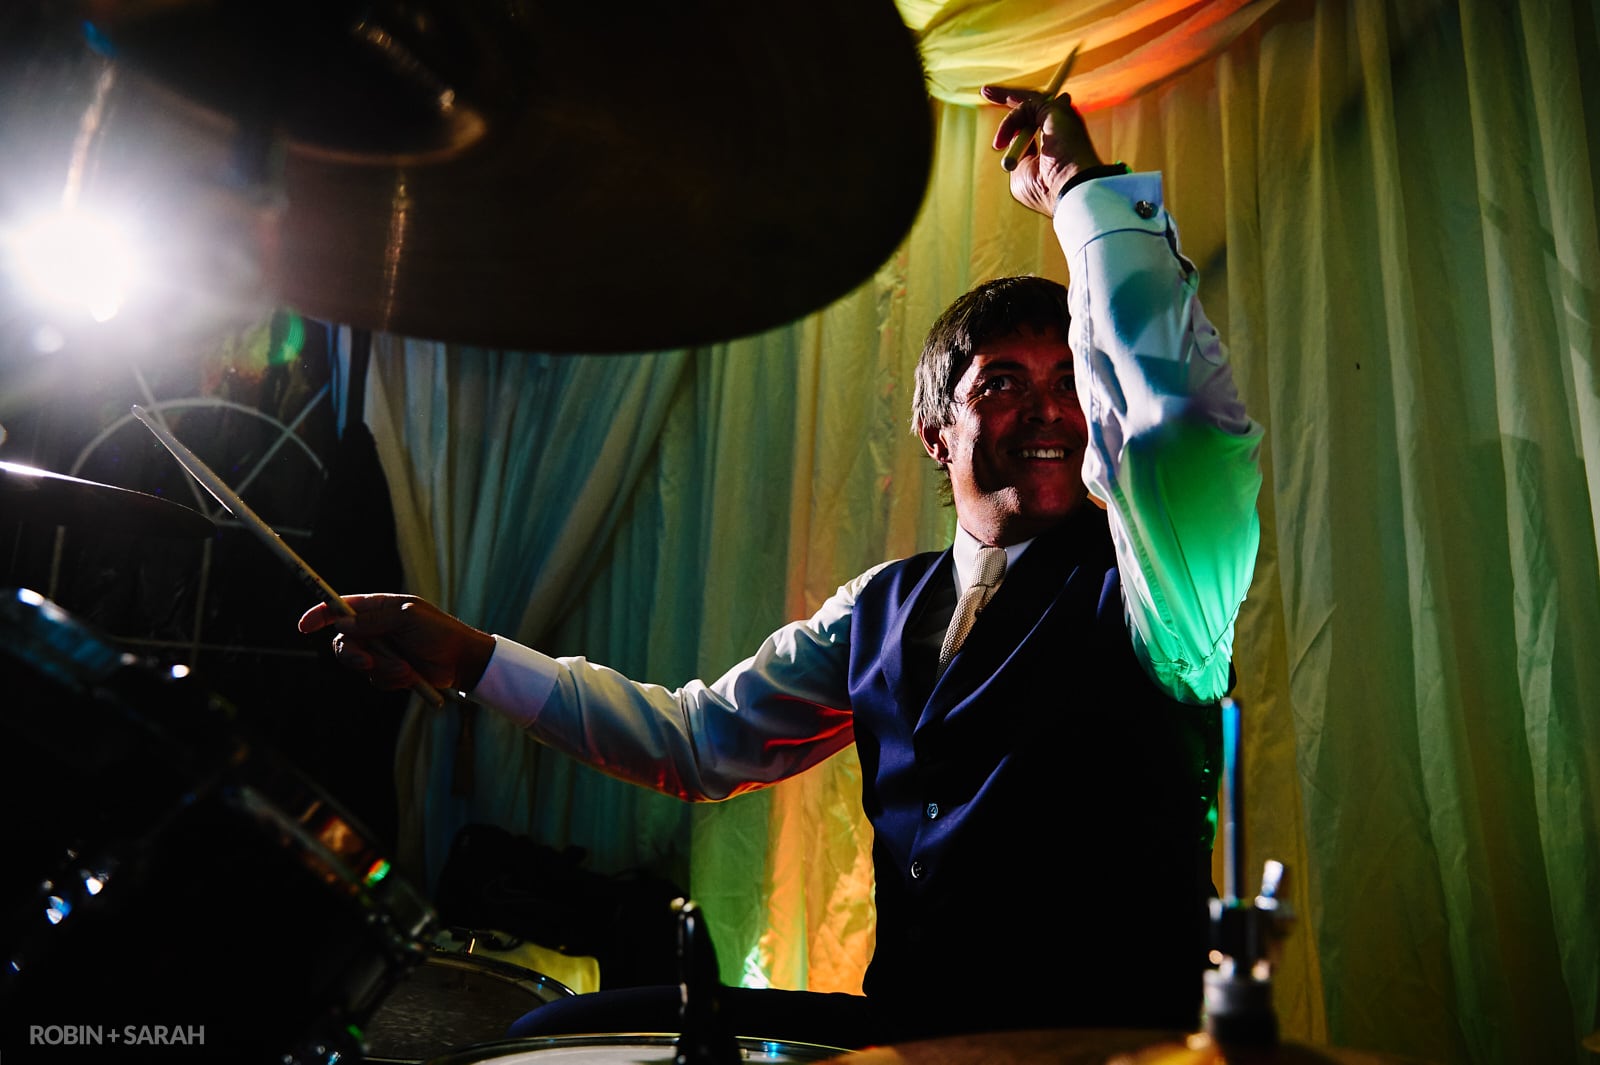 Groom plays drums with band in marquee wedding